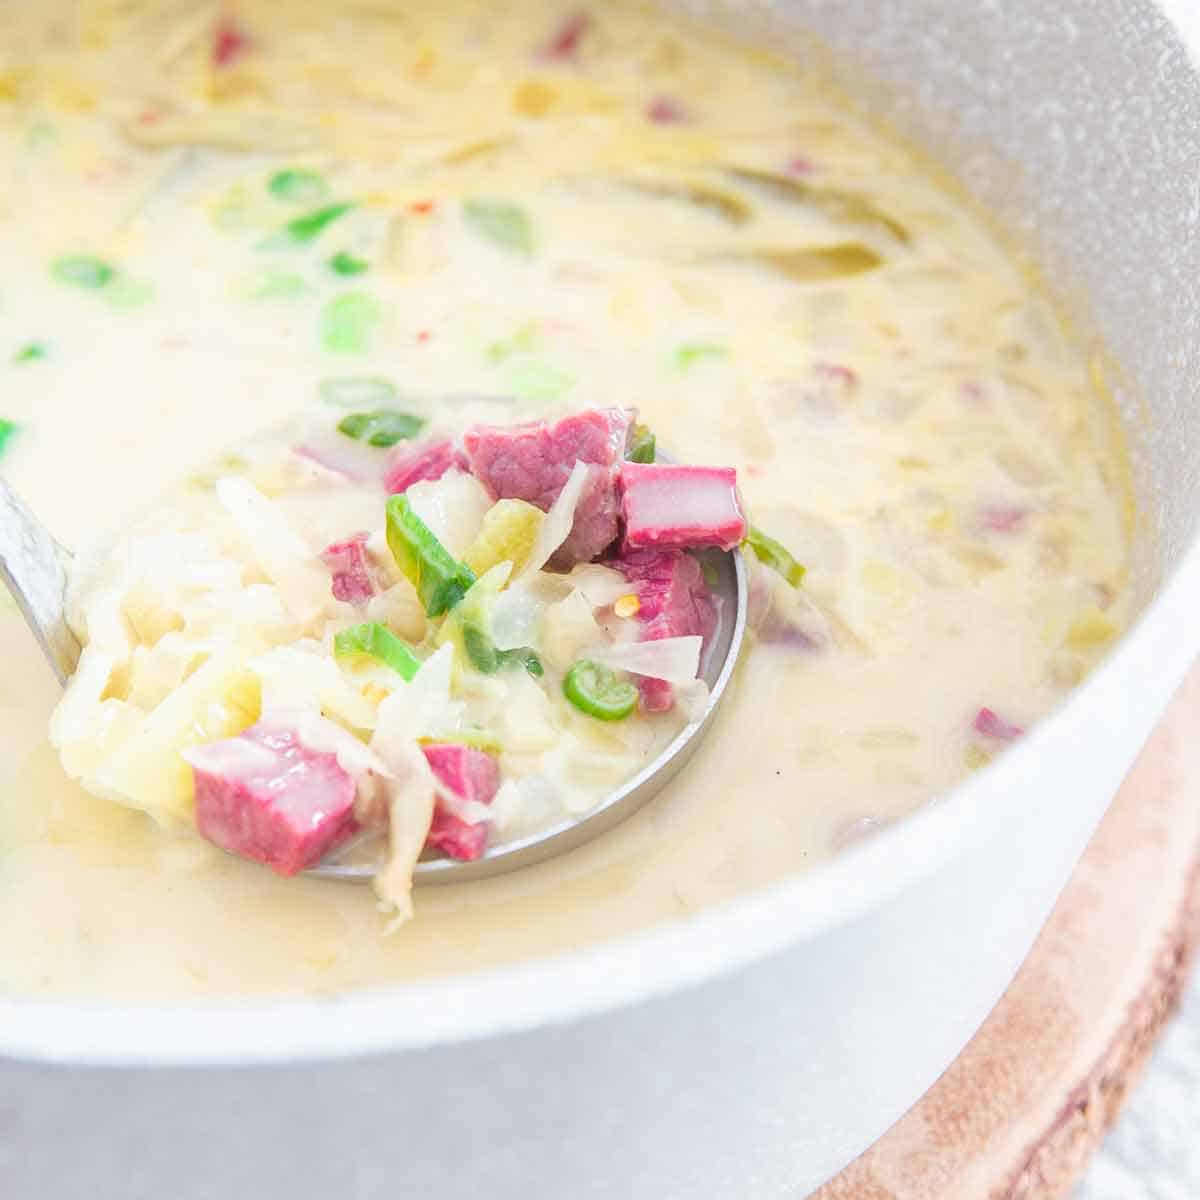 Creamy and comforting Reuben soup is a great recipe for using up leftover corned beef this St. Patrick's Day.